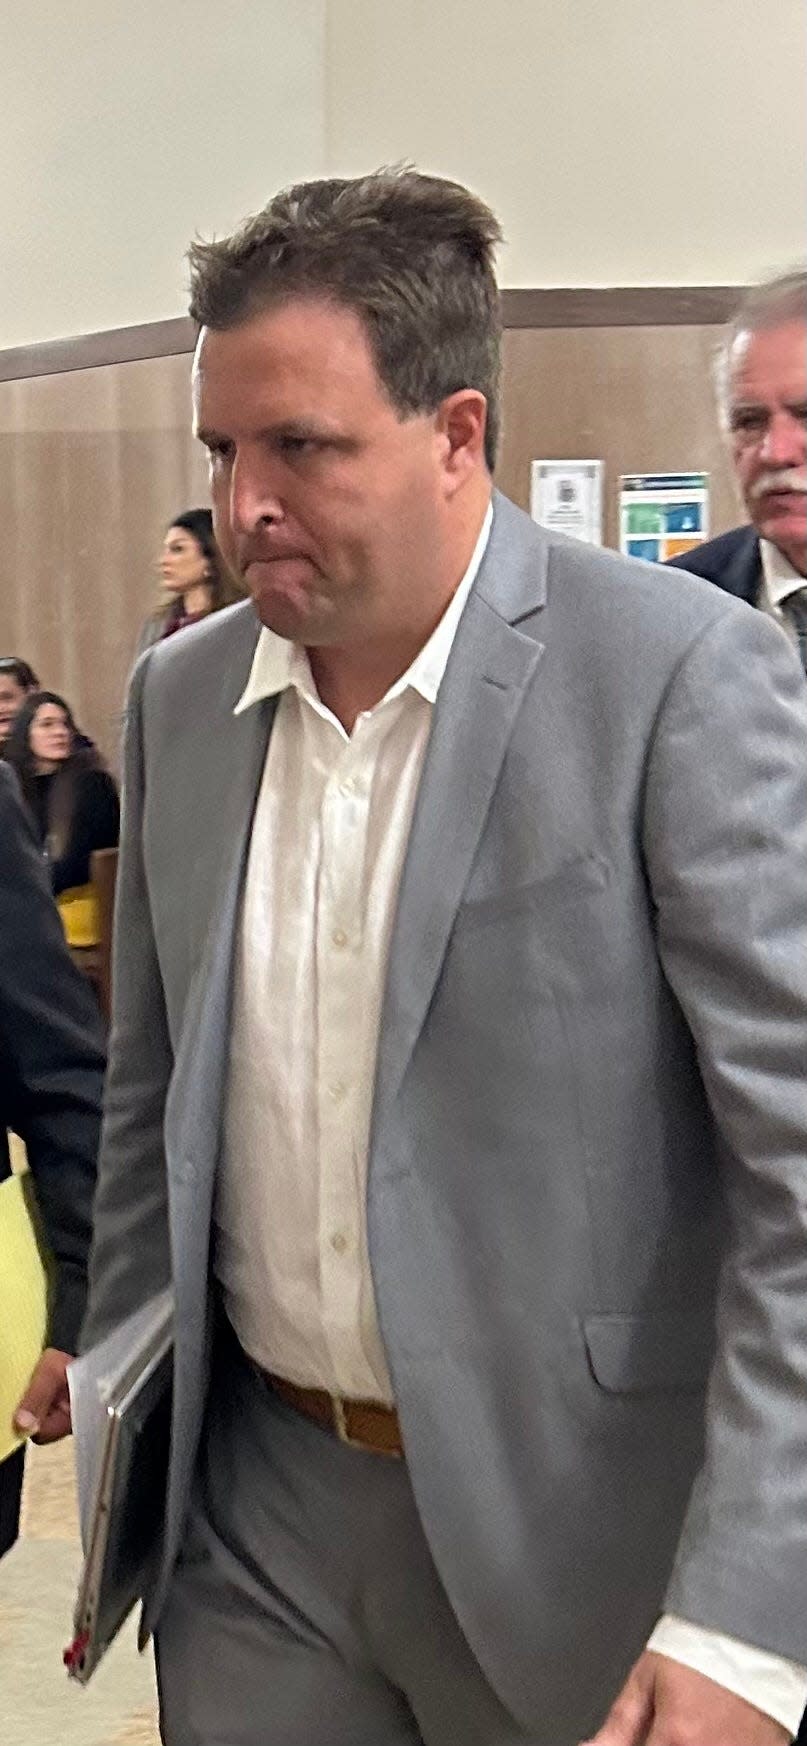 Joshua Brock, the former chief financial officer at Epic Charter Schools, walks to an Oklahoma County courtroom to continue his testimony against his bosses.